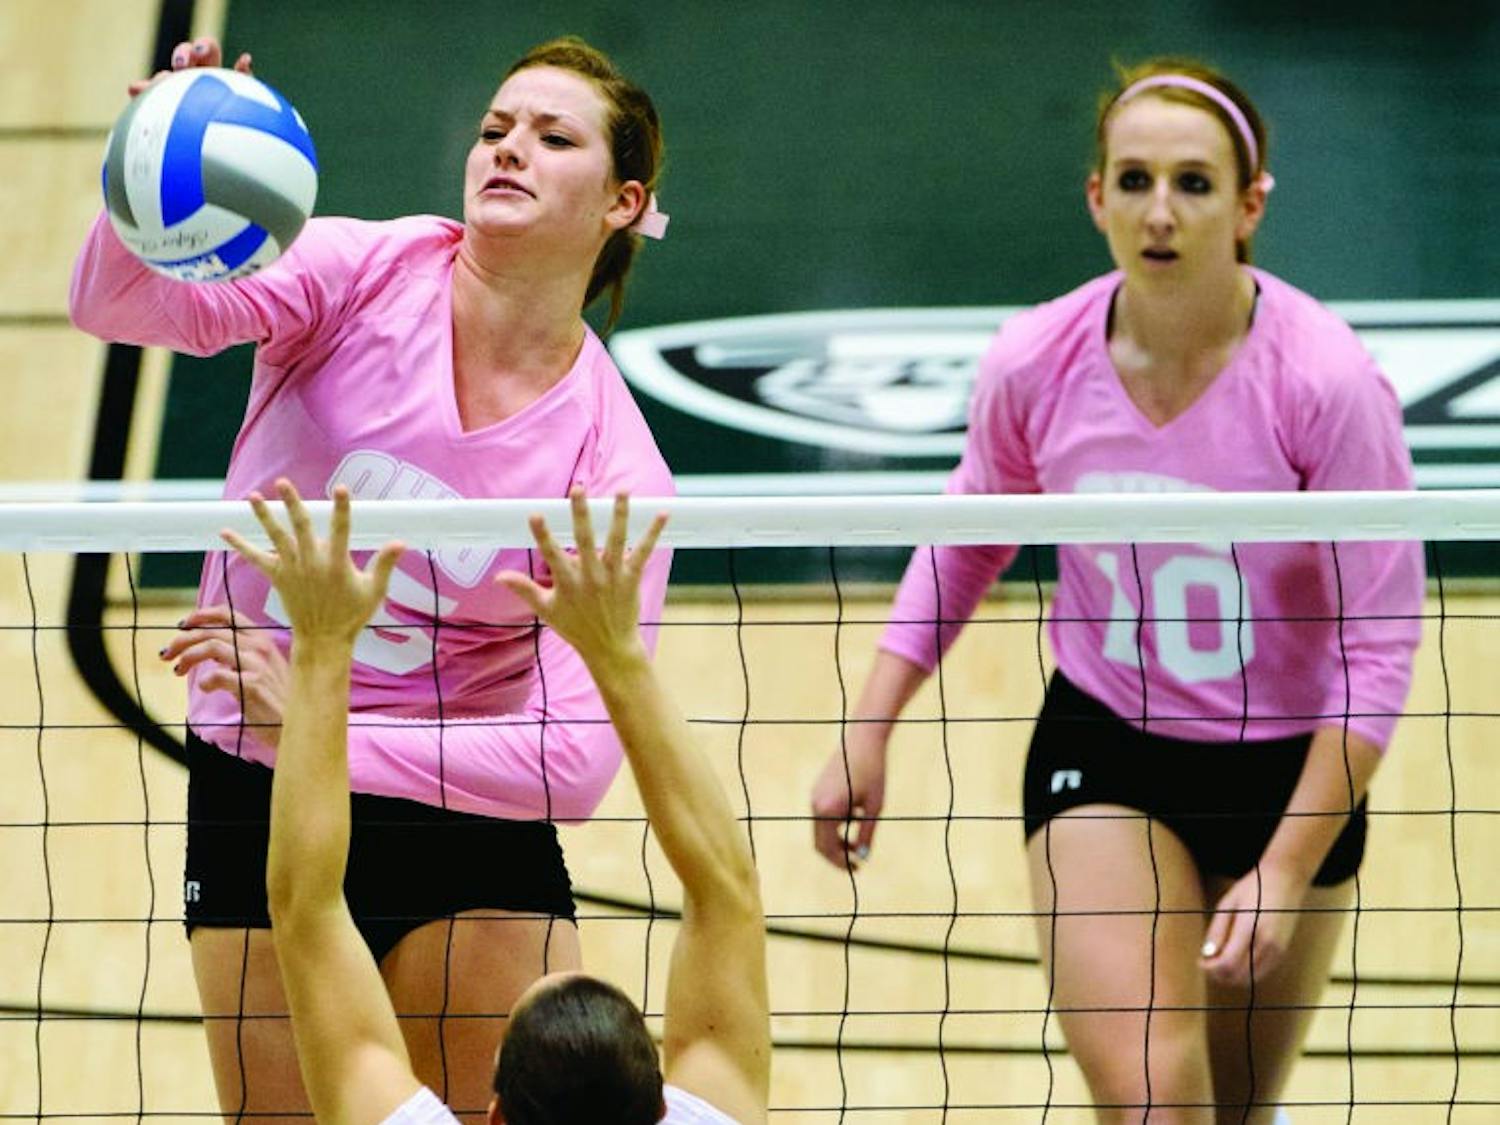 Volleyball: Ohio aims for strong finish, tournament run  